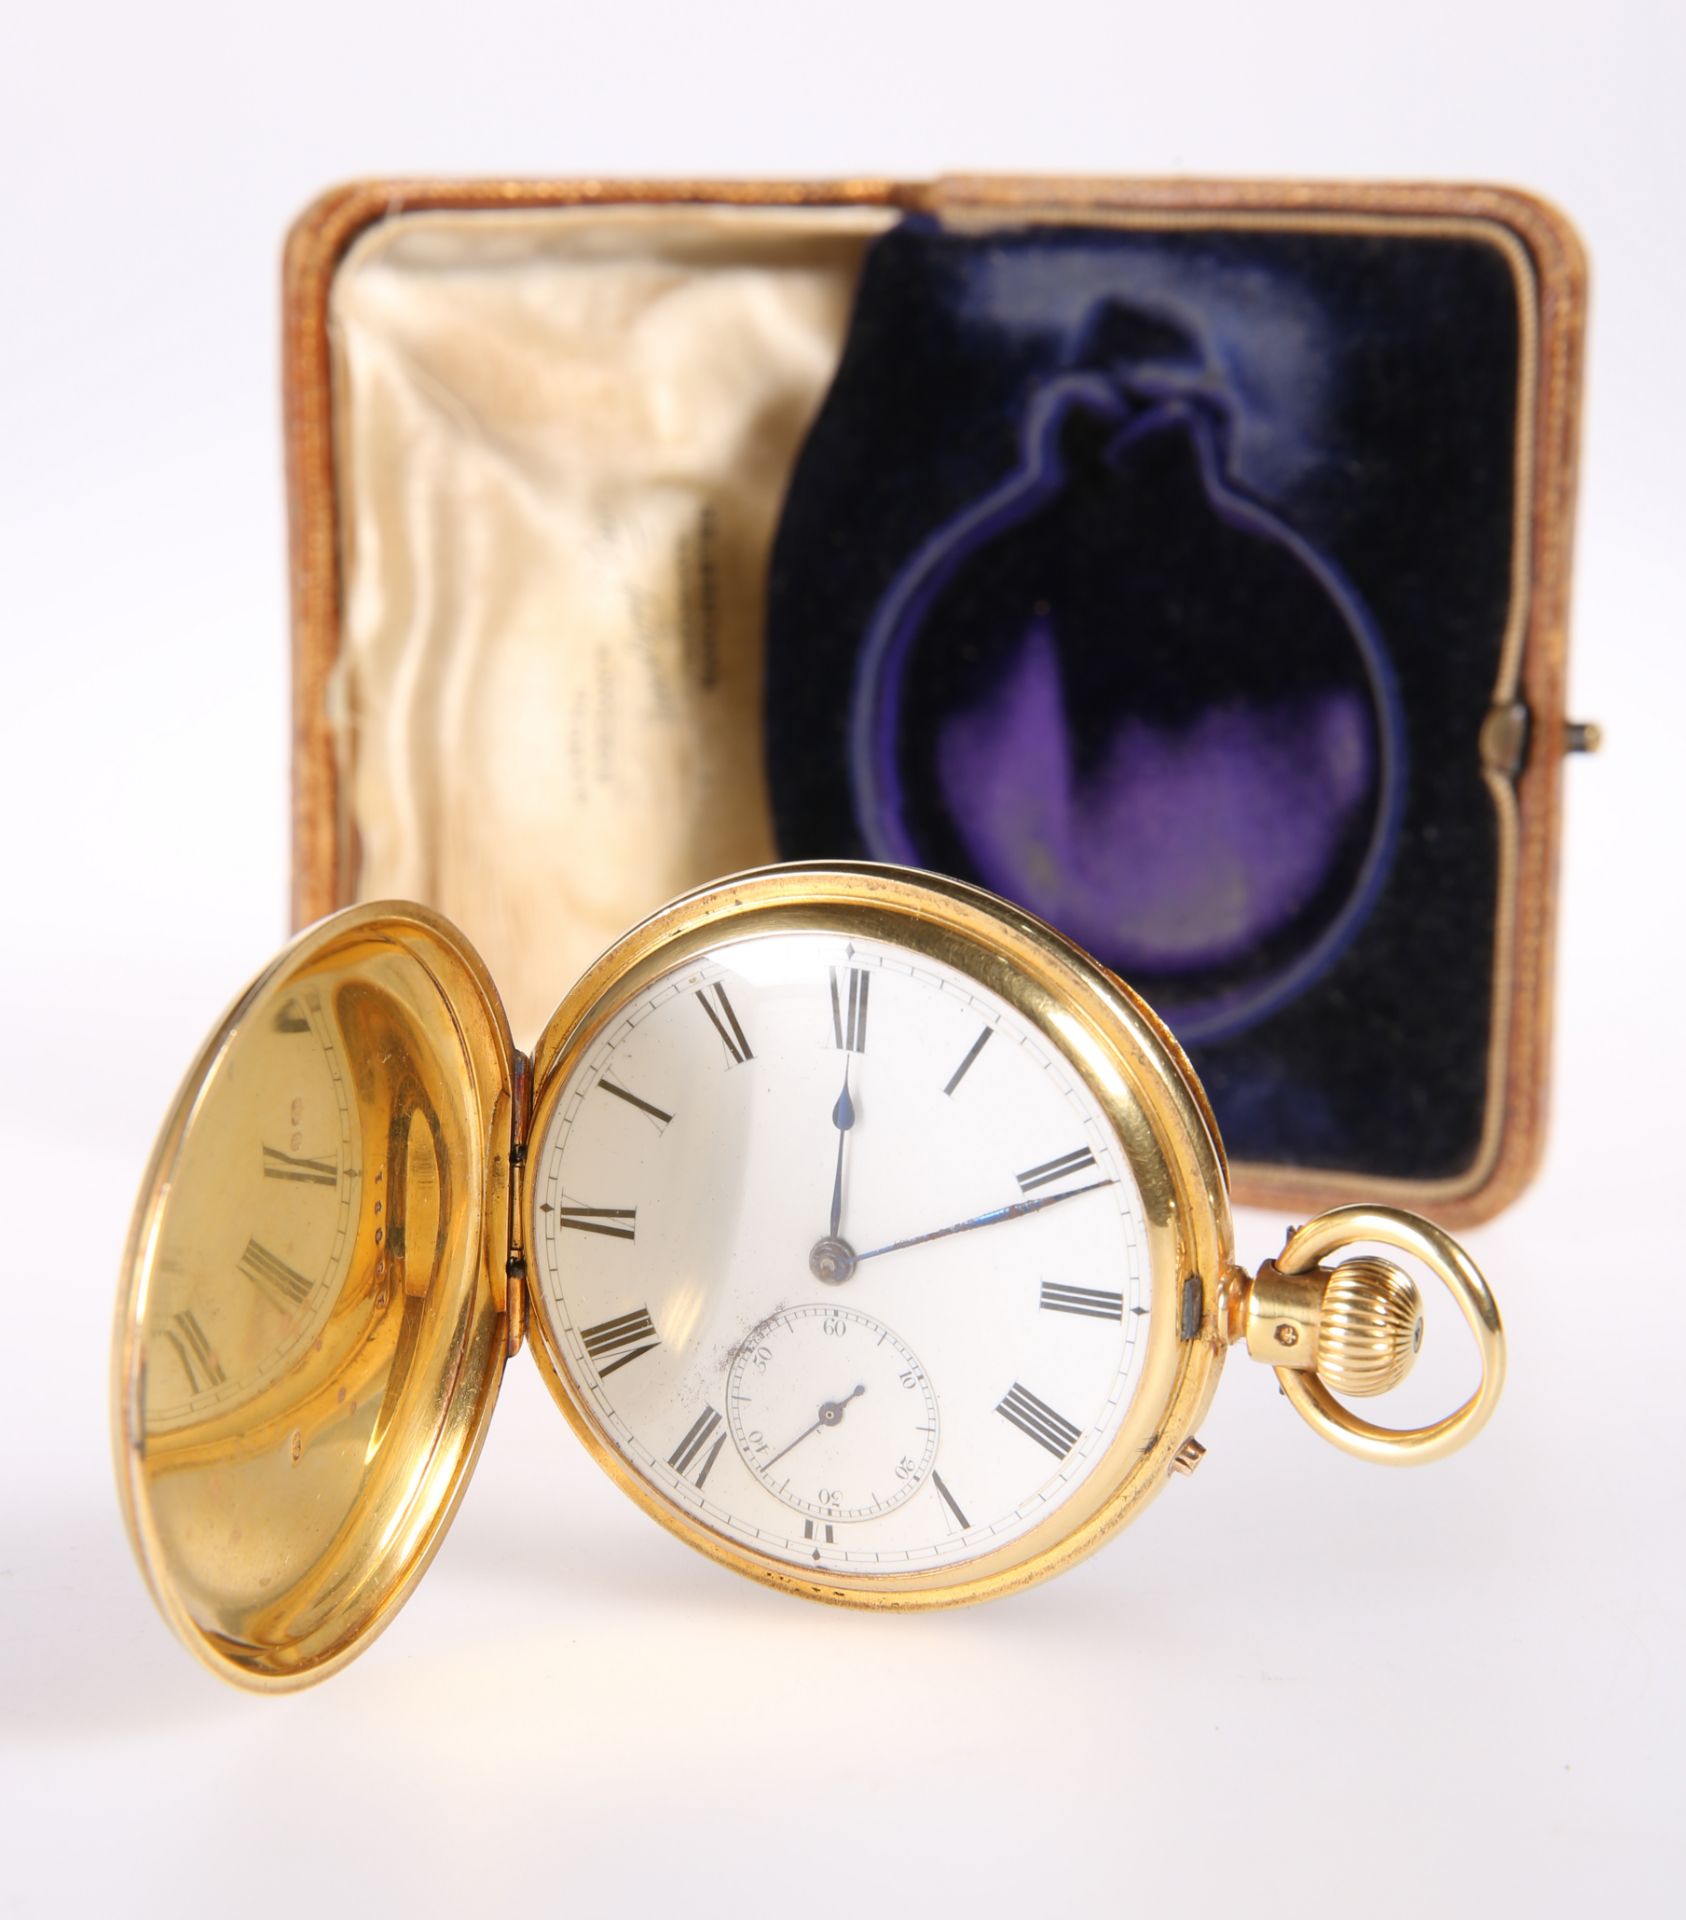 A VICTORIAN 18 CARAT GOLD HUNTER POCKET WATCH, the case by John Yardley, London 1866, the white